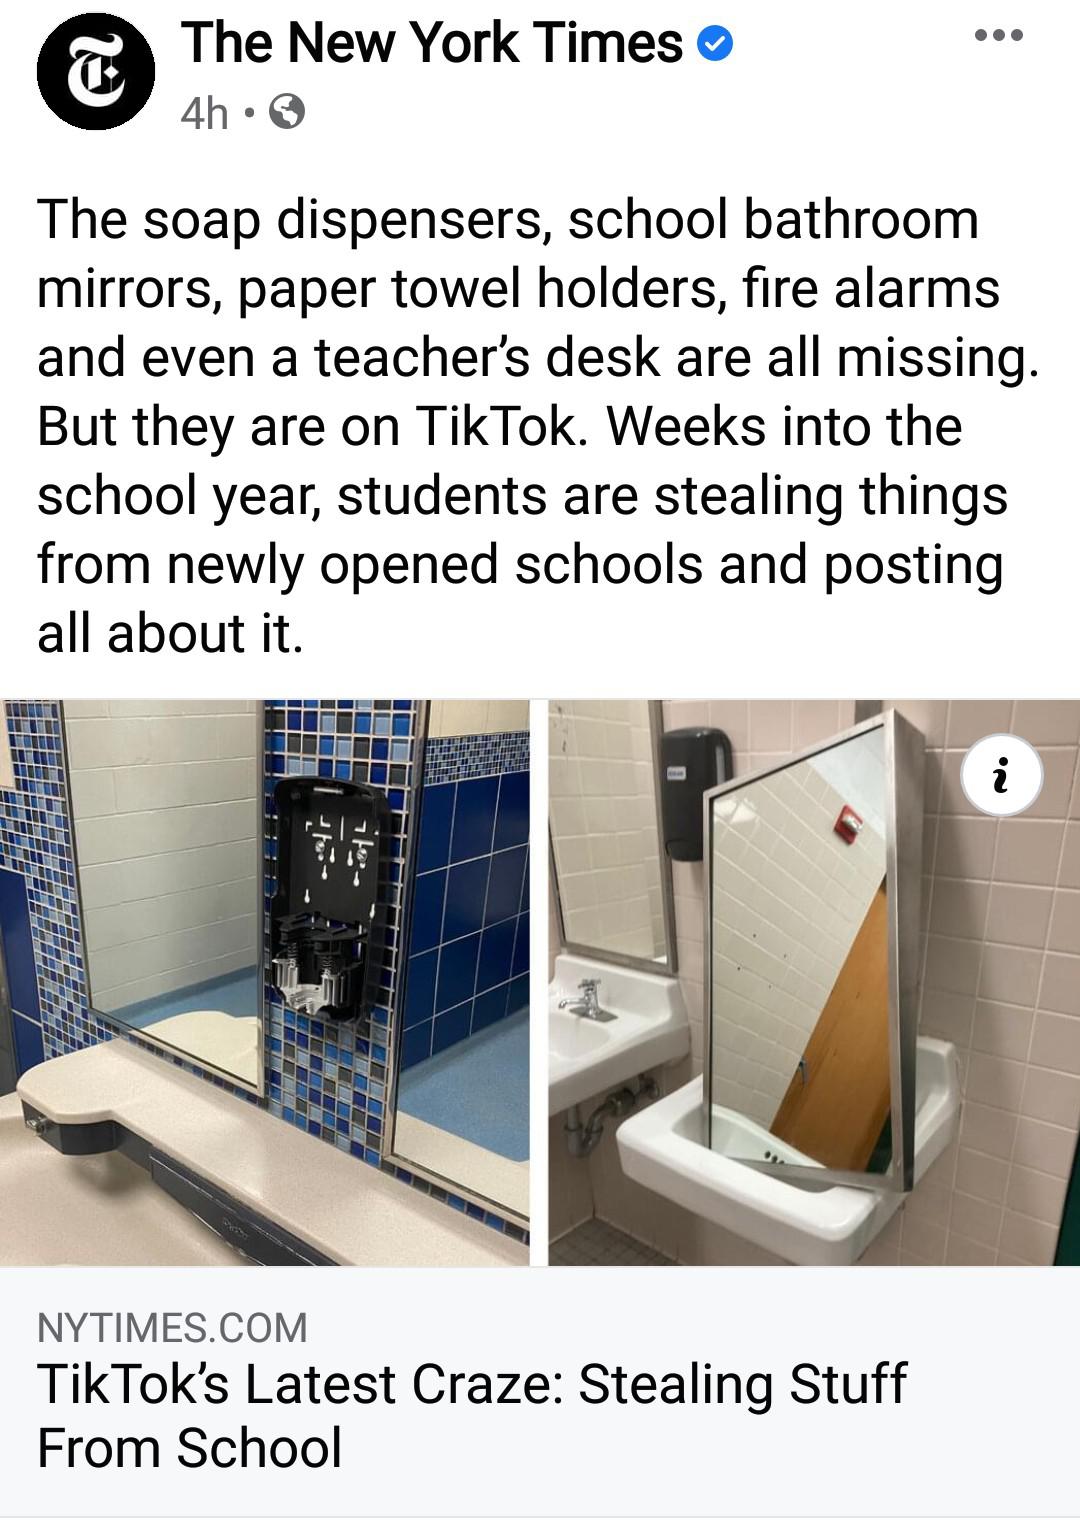 cringe pics - wtf pics - furniture - T The New York Times 4h. The soap dispensers, shool bathroom mirrors, paper towel holders, fire alarms and even a teacher's desk are all missing. But they are on TikTok. Weeks into the school year, students are stealin